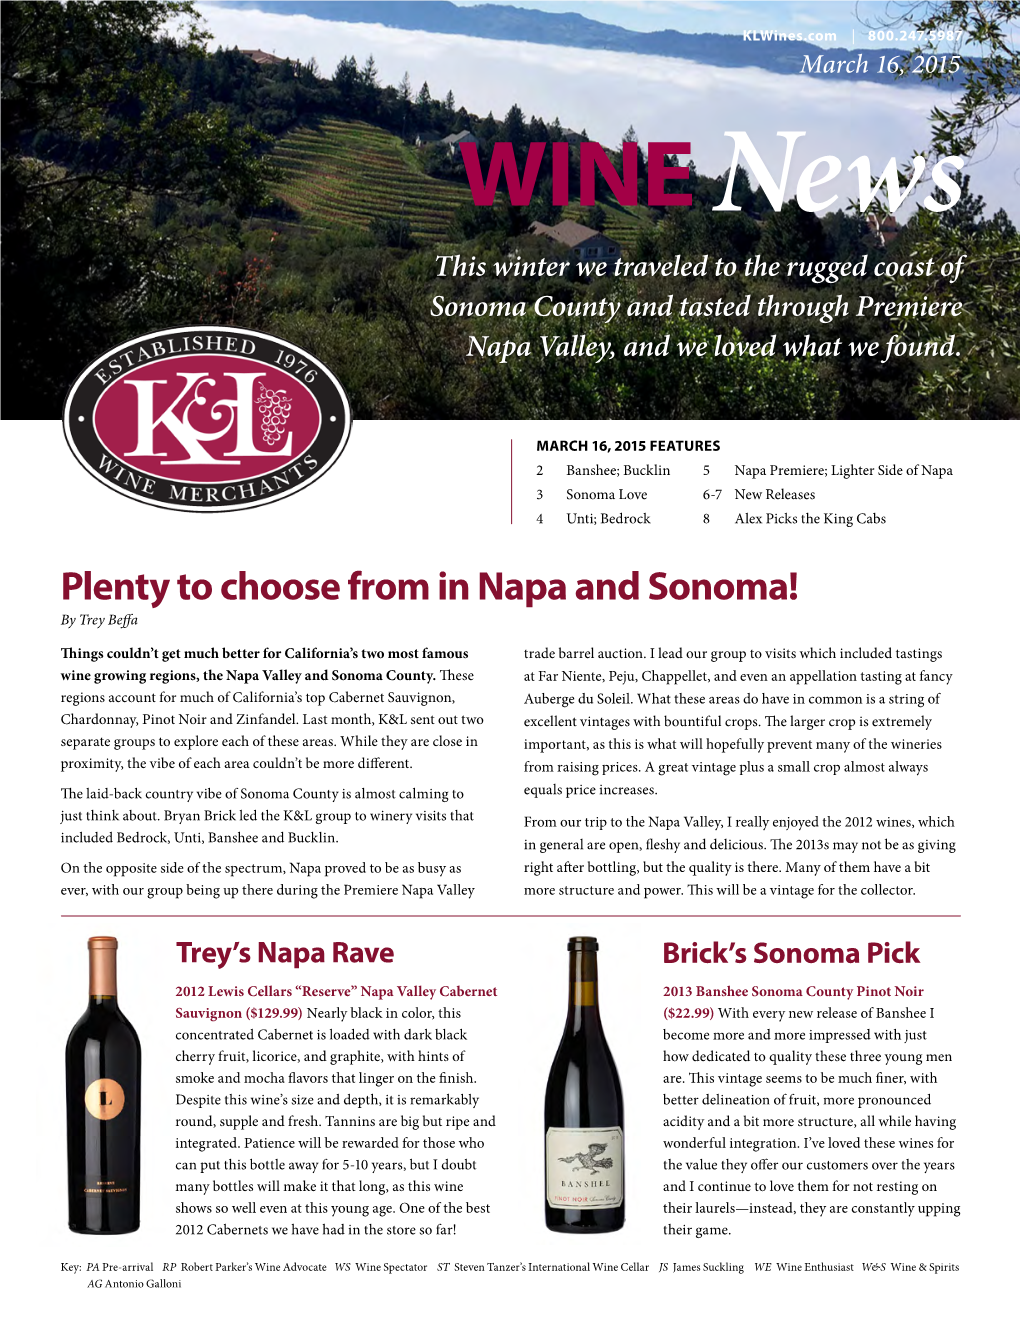 Plenty to Choose from in Napa and Sonoma! by Trey Beffa